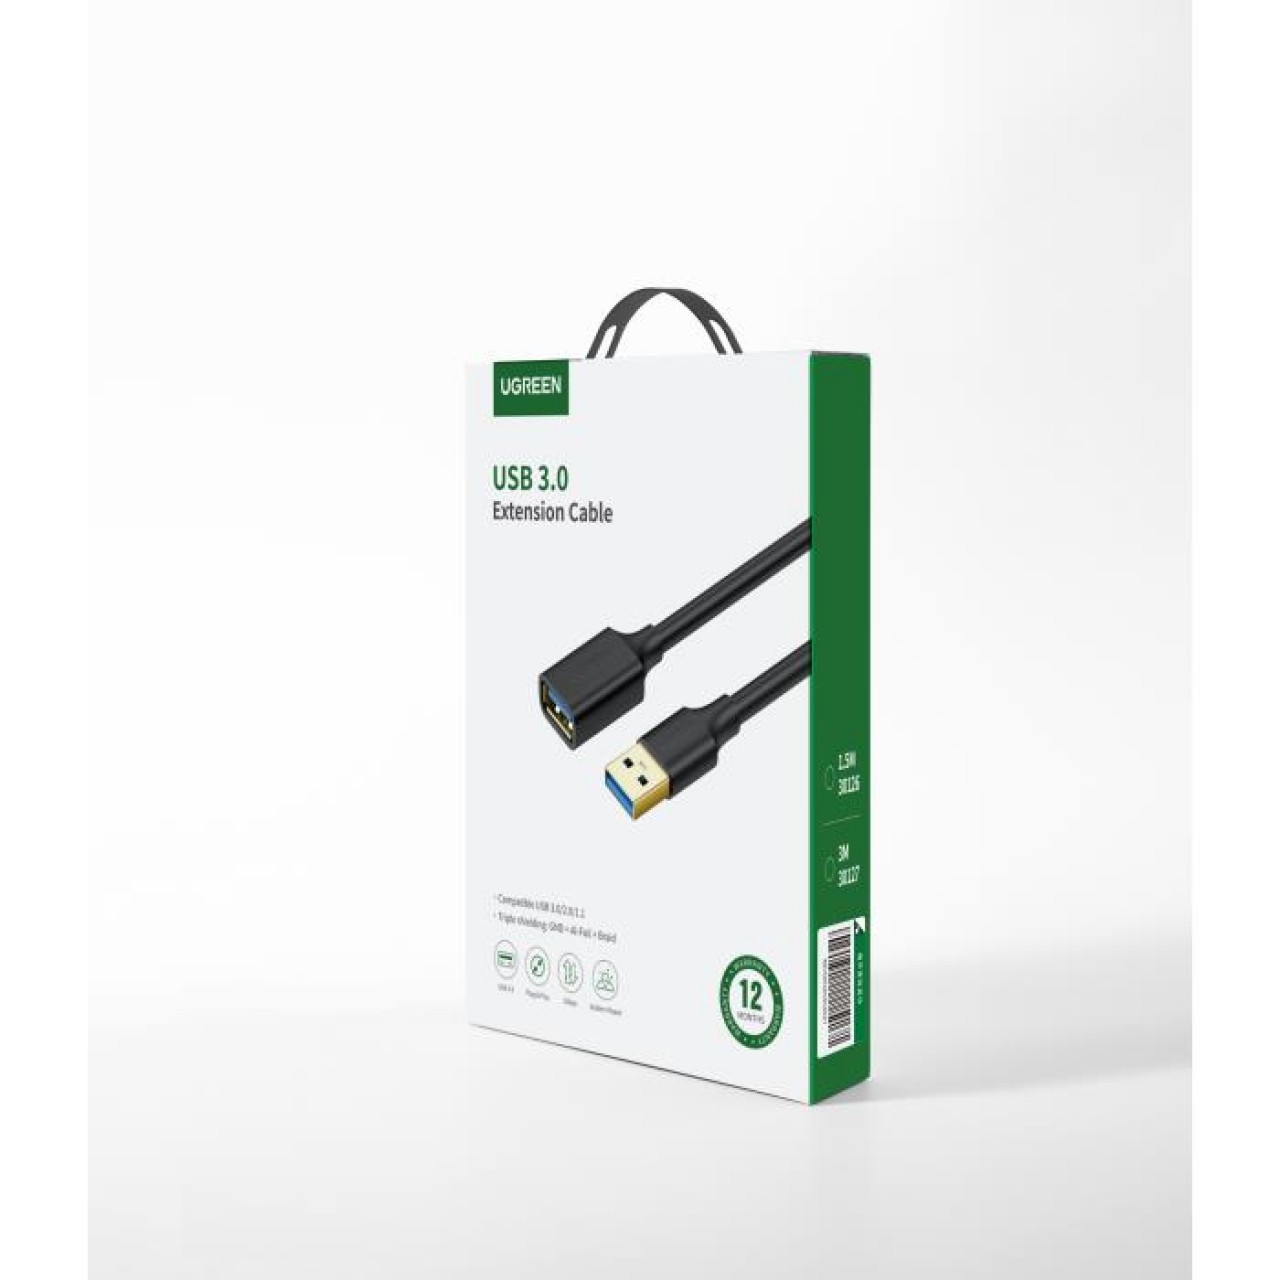 Cable USB 3.0 M/F 2m UGREEN US129 10373